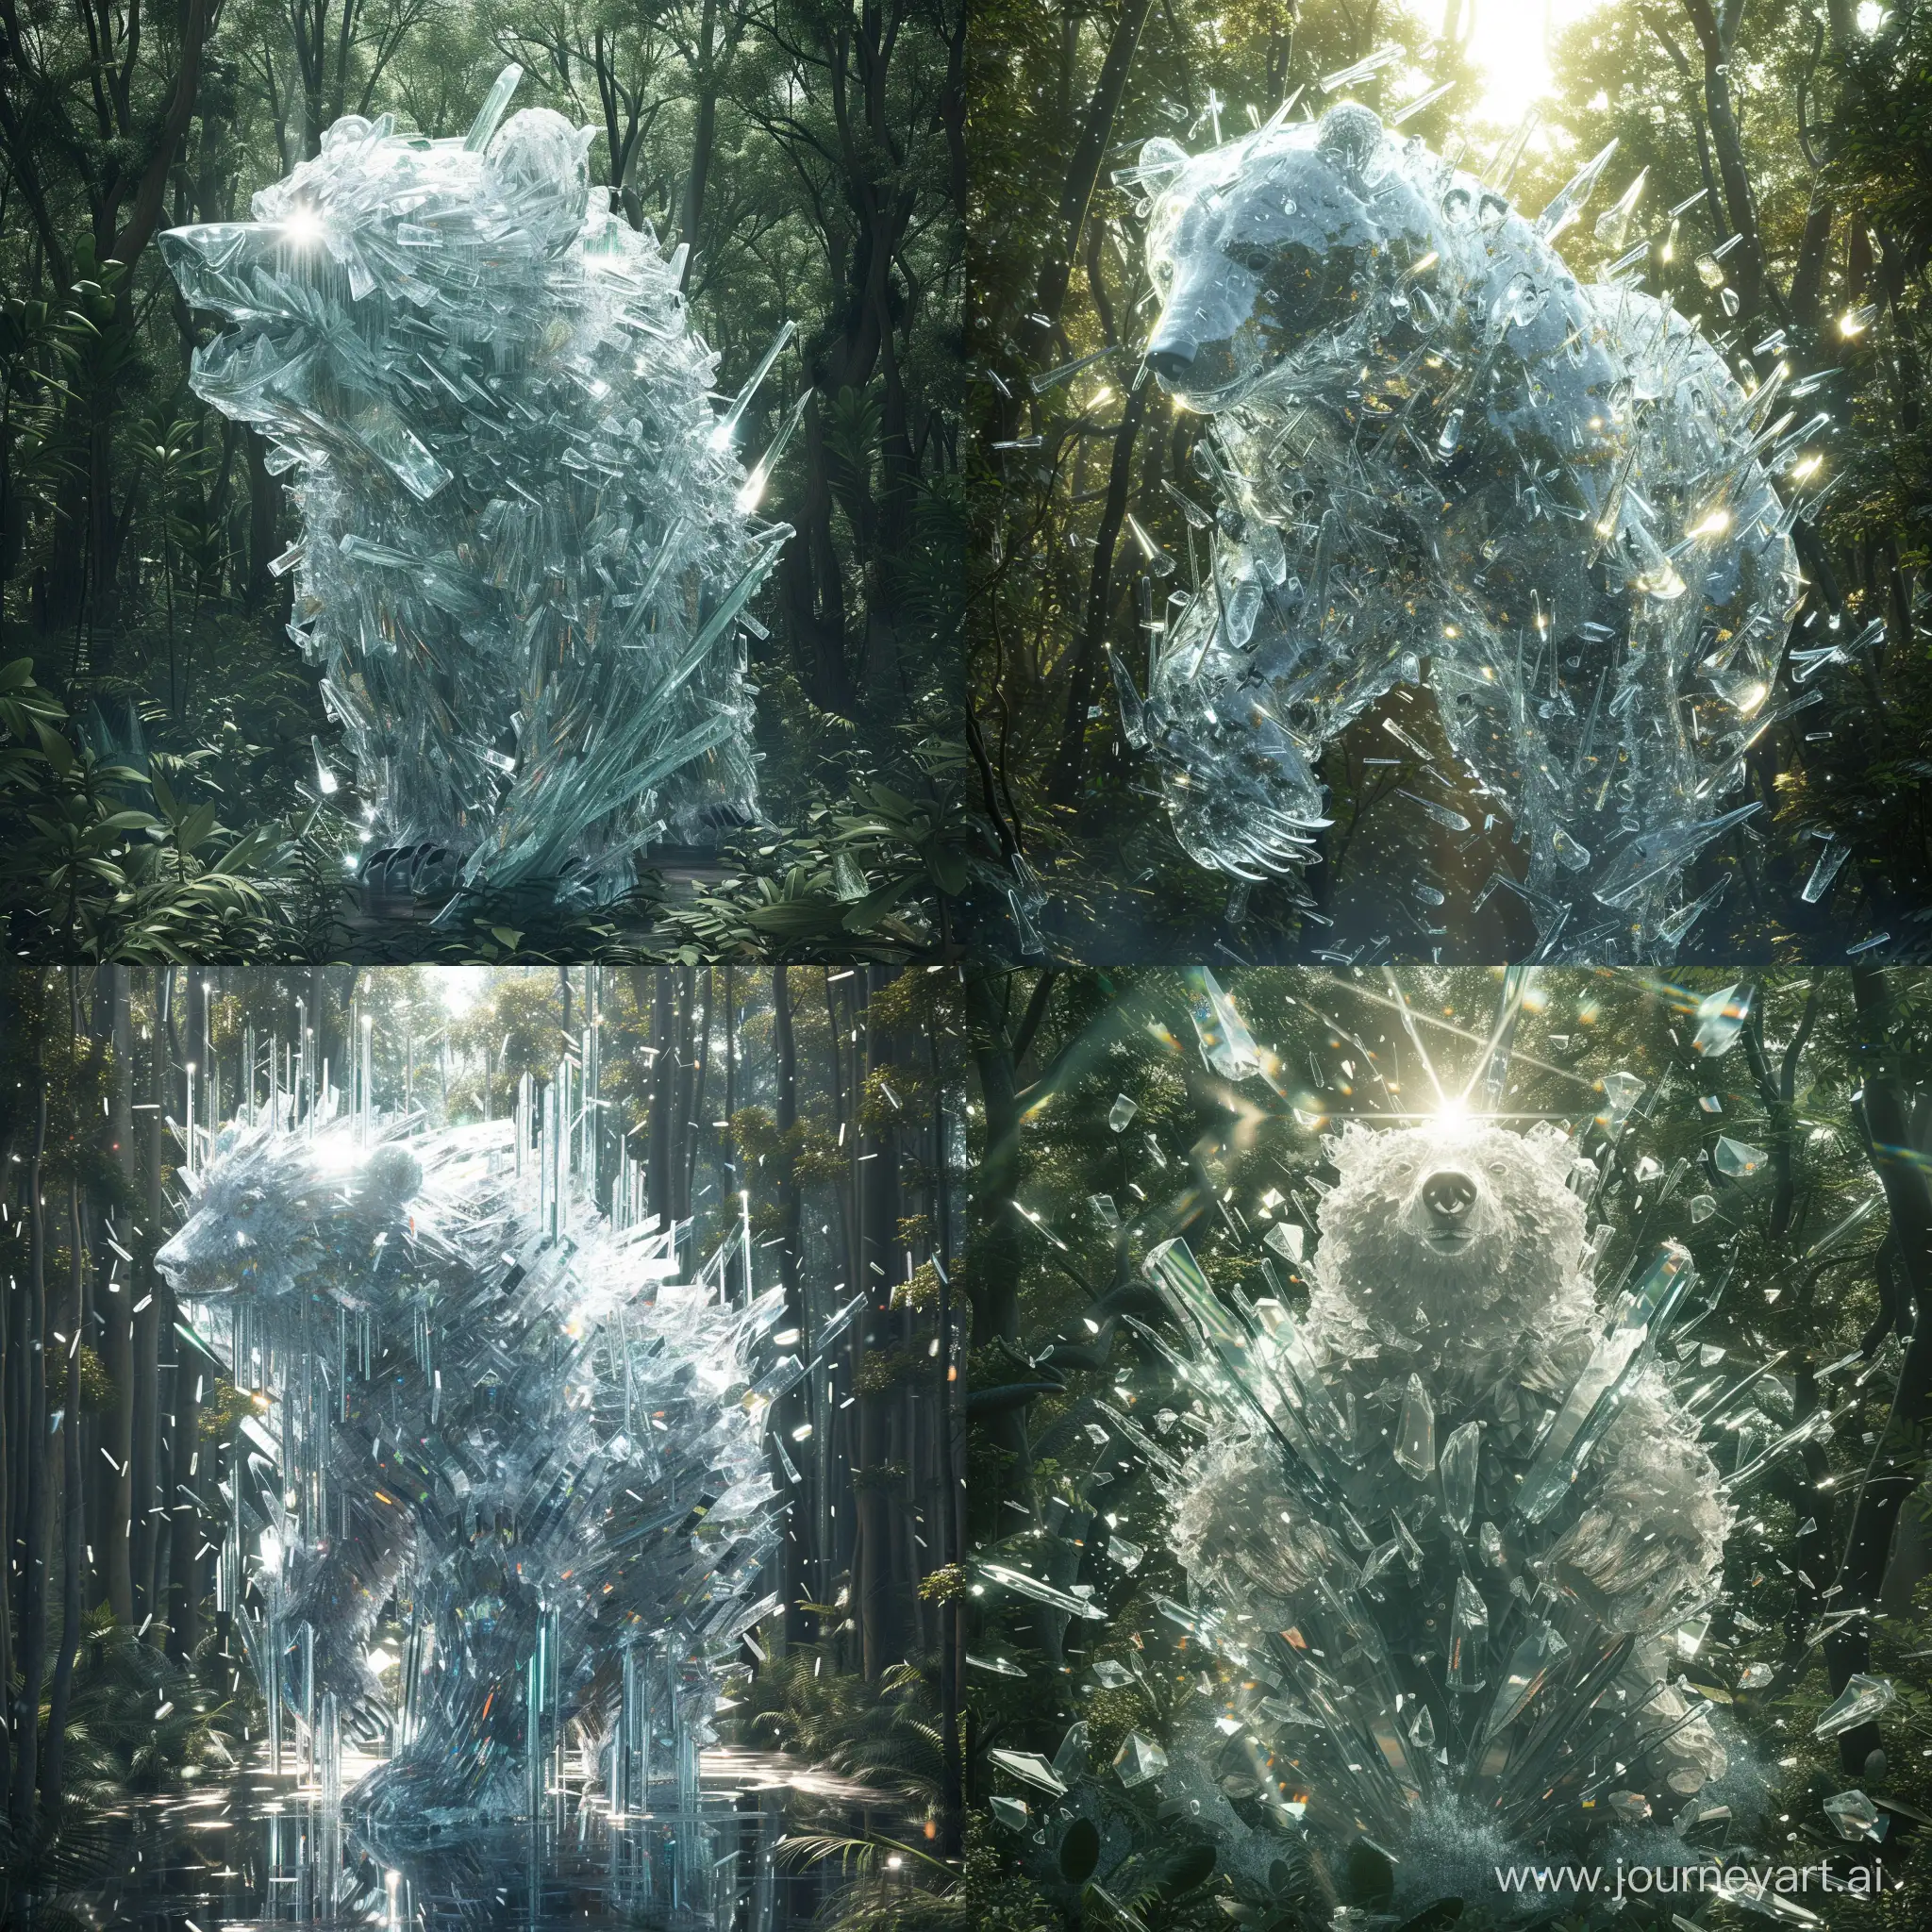 Create a highly detailed image of a bear made entirely of ice and glass, situated in the center of a dense, enchanted forest. The bear should reflect and refract the surrounding trees and light in a realistic and visually stunning manner, with shards of ice and glass seamlessly integrated into its form giving it an ethereal and majestic presence. The